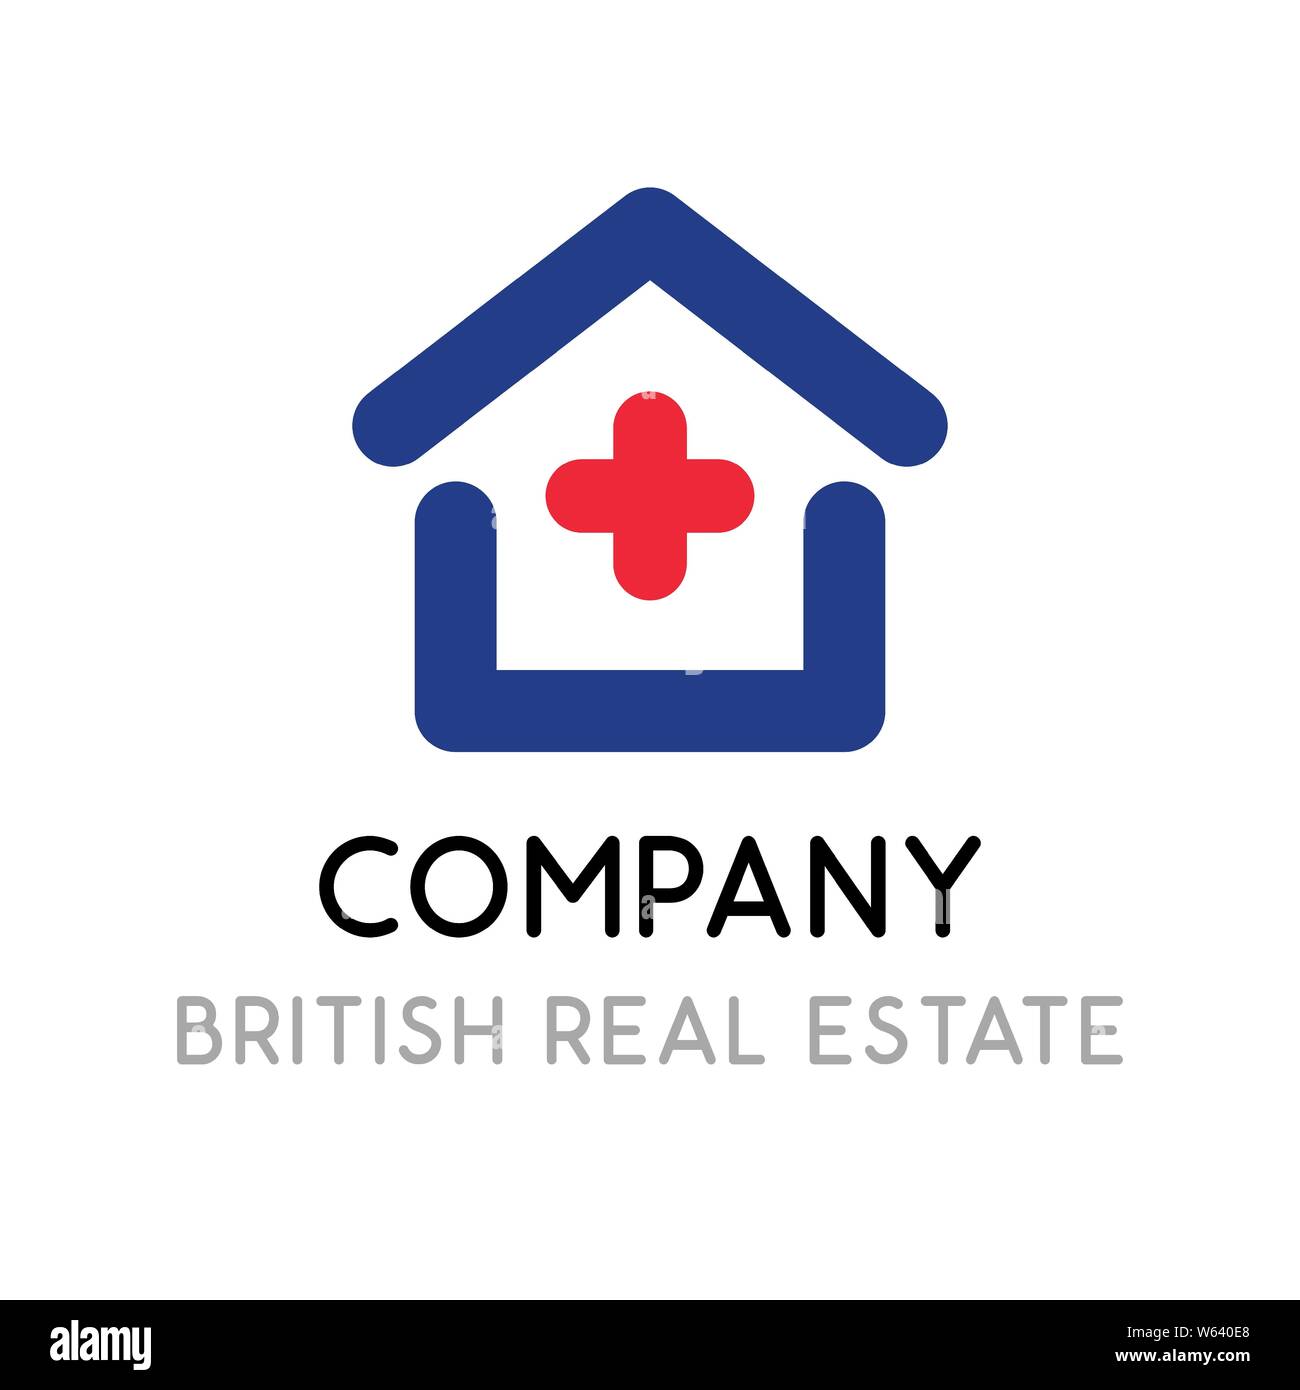 Vector logotype template for British Real Estate company. Stock Vector